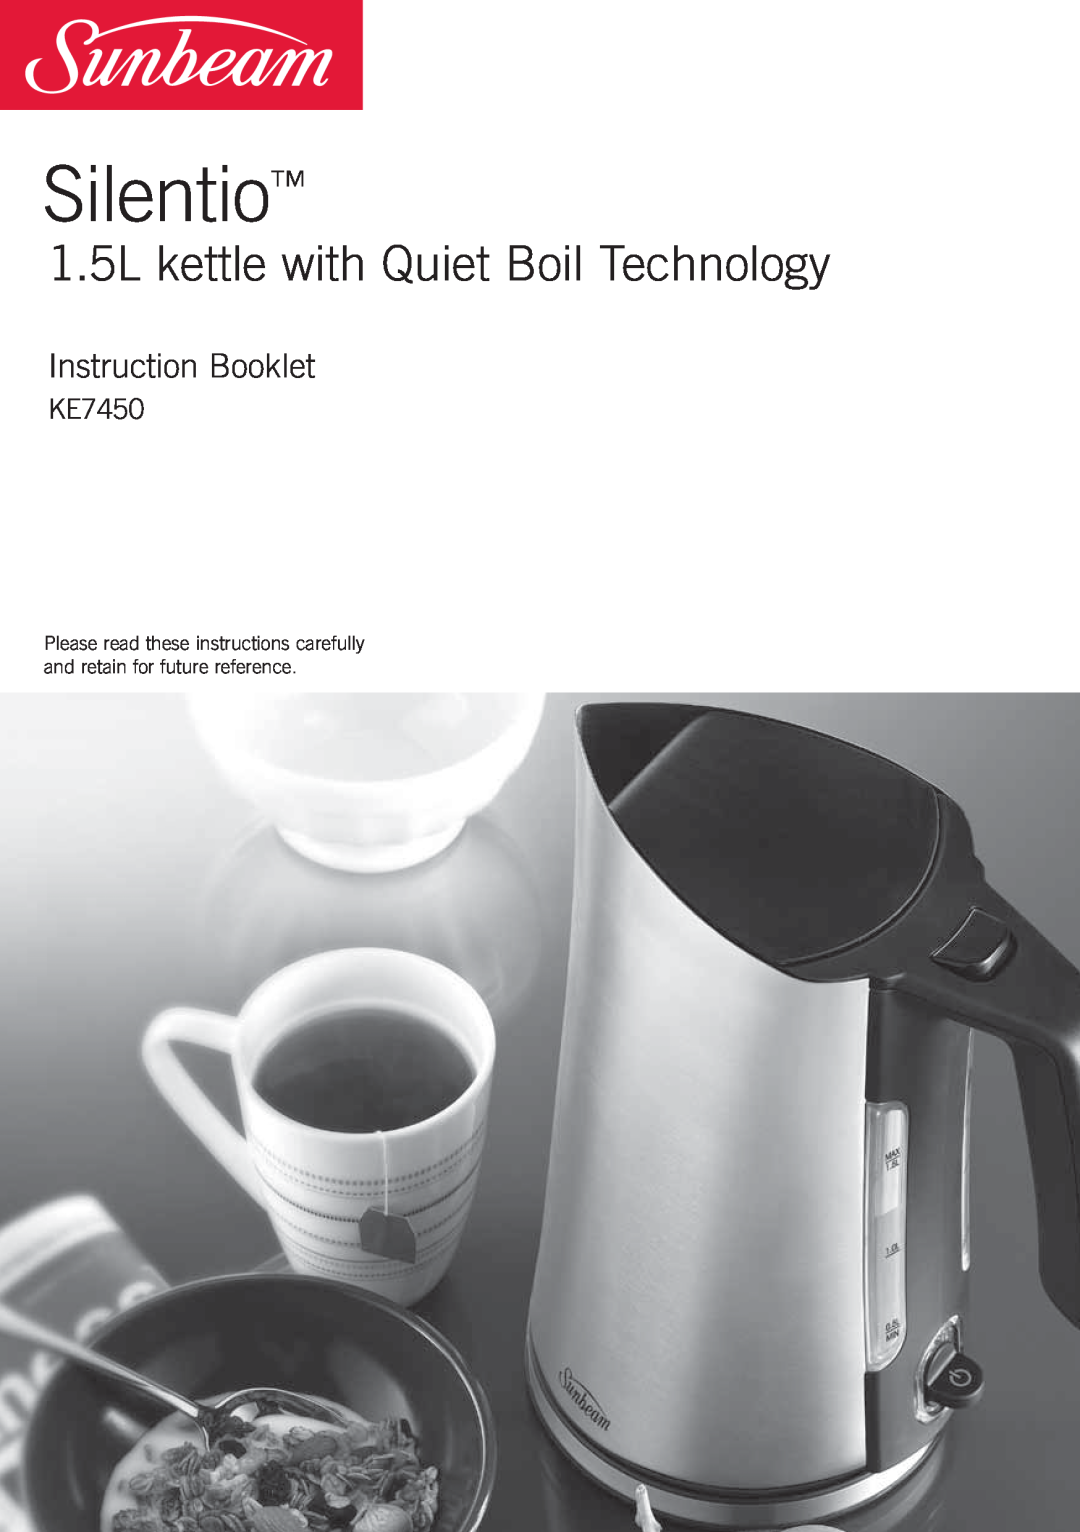 Sunbeam KE7450 manual Silentio, 1.5L kettle with Quiet Boil Technology, Instruction Booklet 